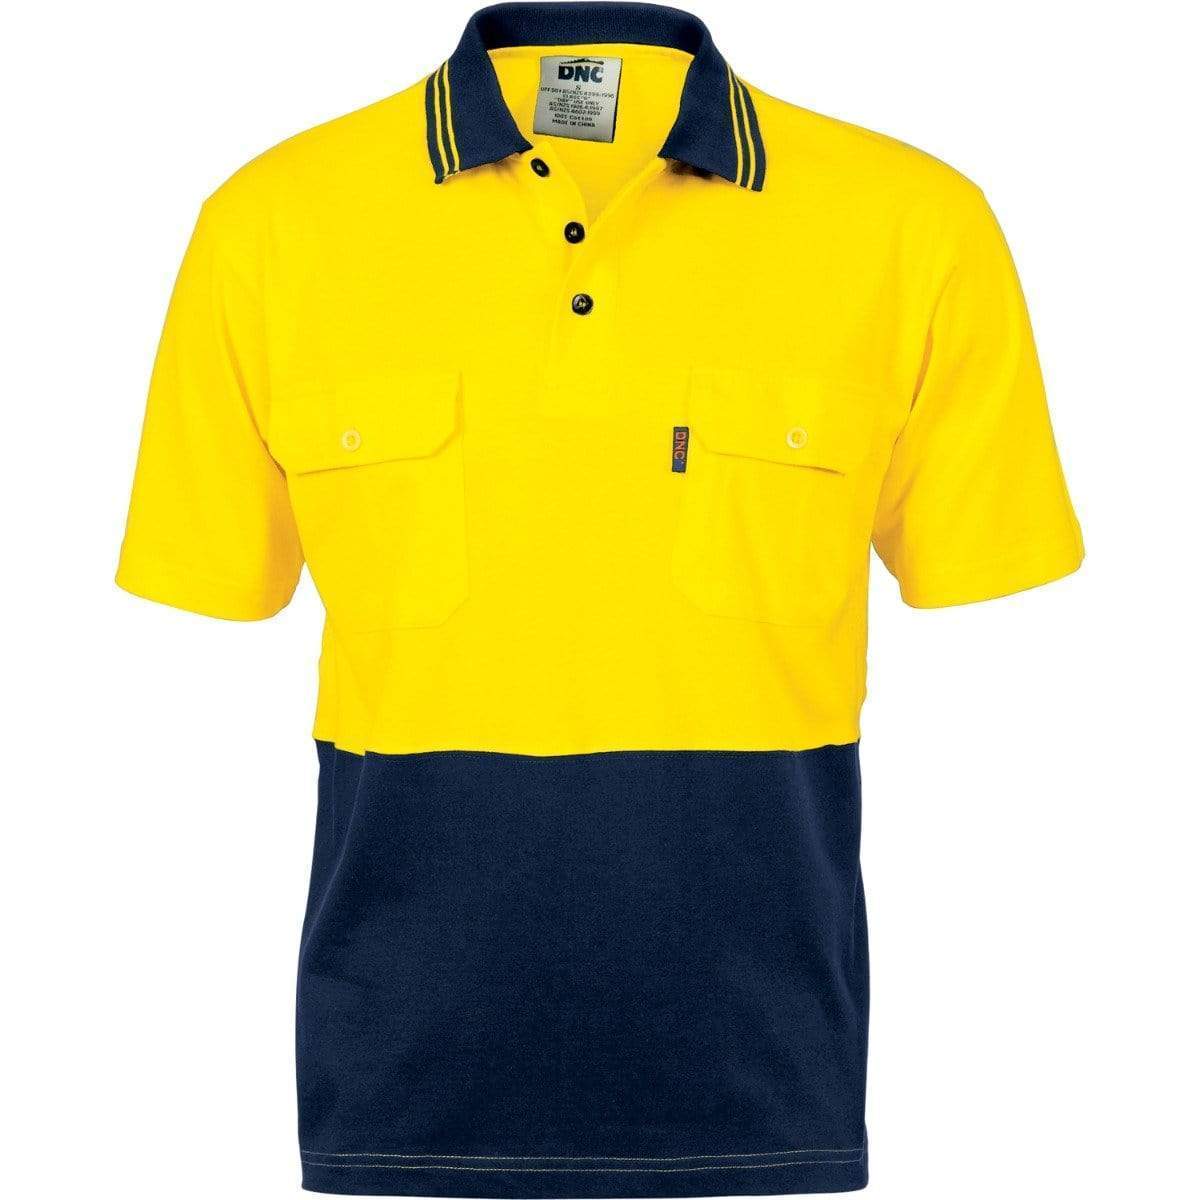 Dnc Workwear Hi-vis Cool-breeze 2-tone Cotton Jersey Short Sleeve Polo Shirt With Twin Chest Pocket - 3943 Work Wear DNC Workwear Yellow/Navy XS 